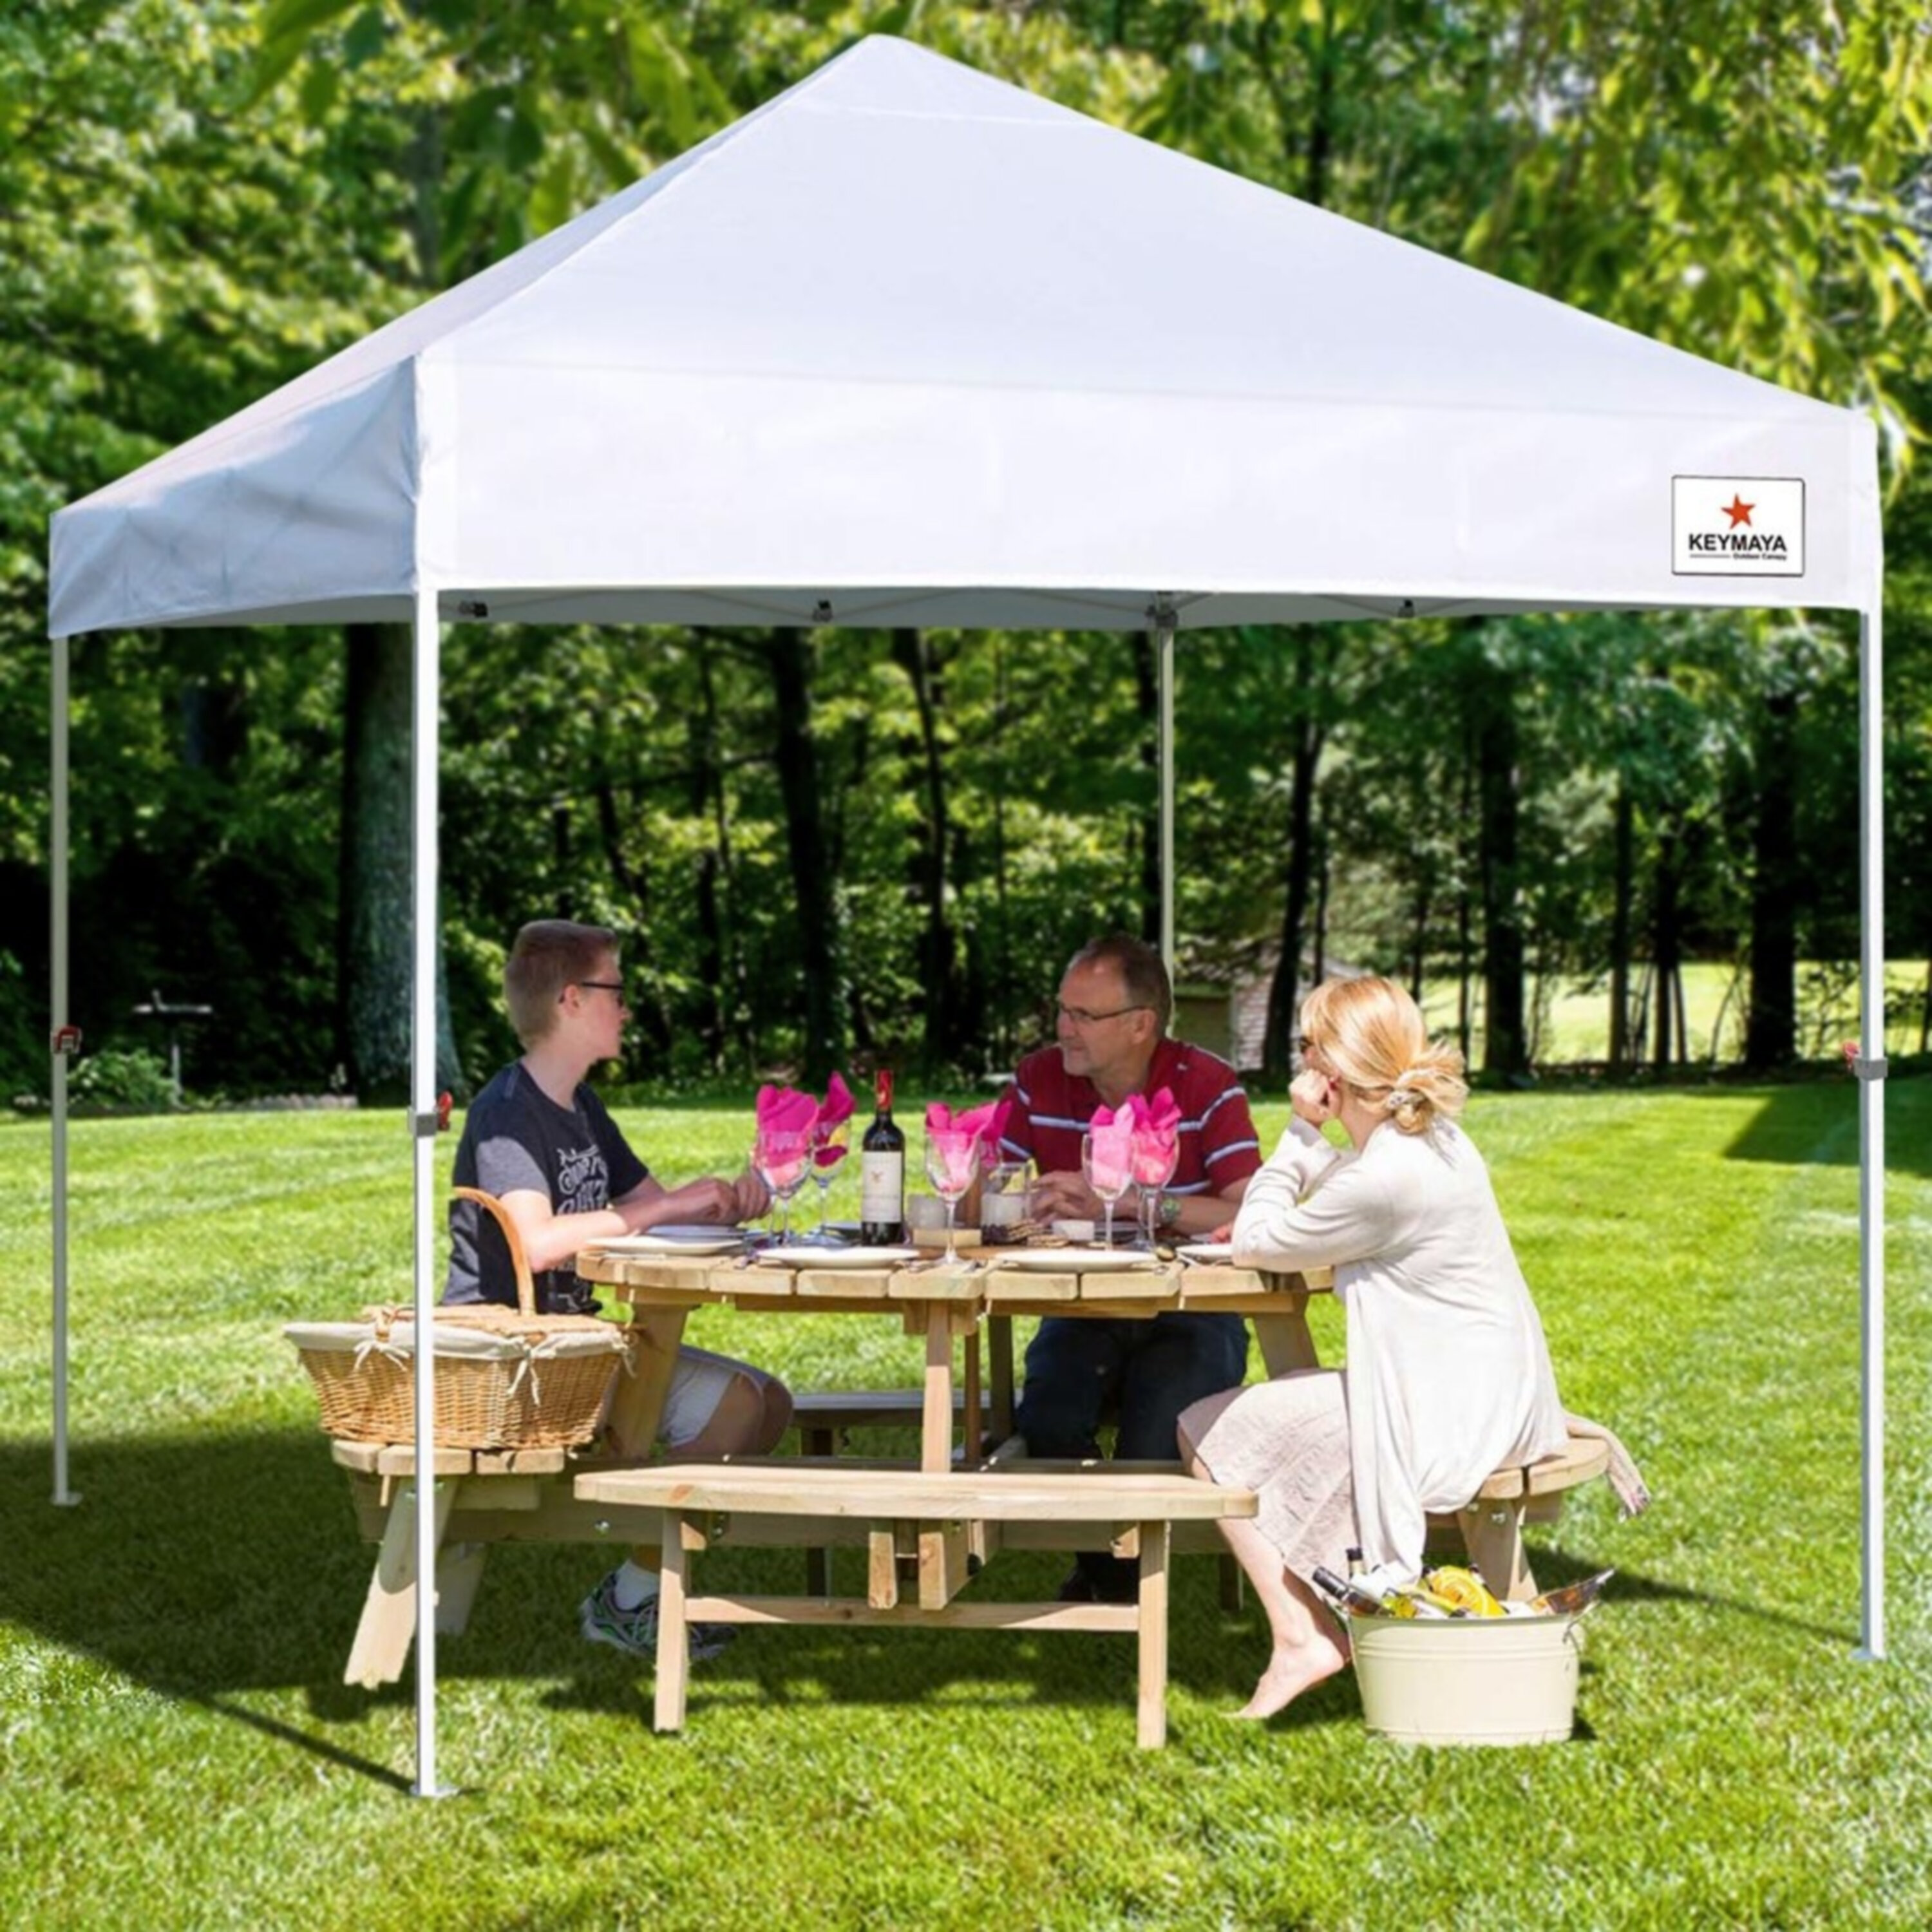 Black-1 Keymaya 10x10 Ez Pop Up Canopy Tent Commercial Instant Shelter with 4 Removable sidewalls Bonus Weight Bag 4-pc Pack ， 